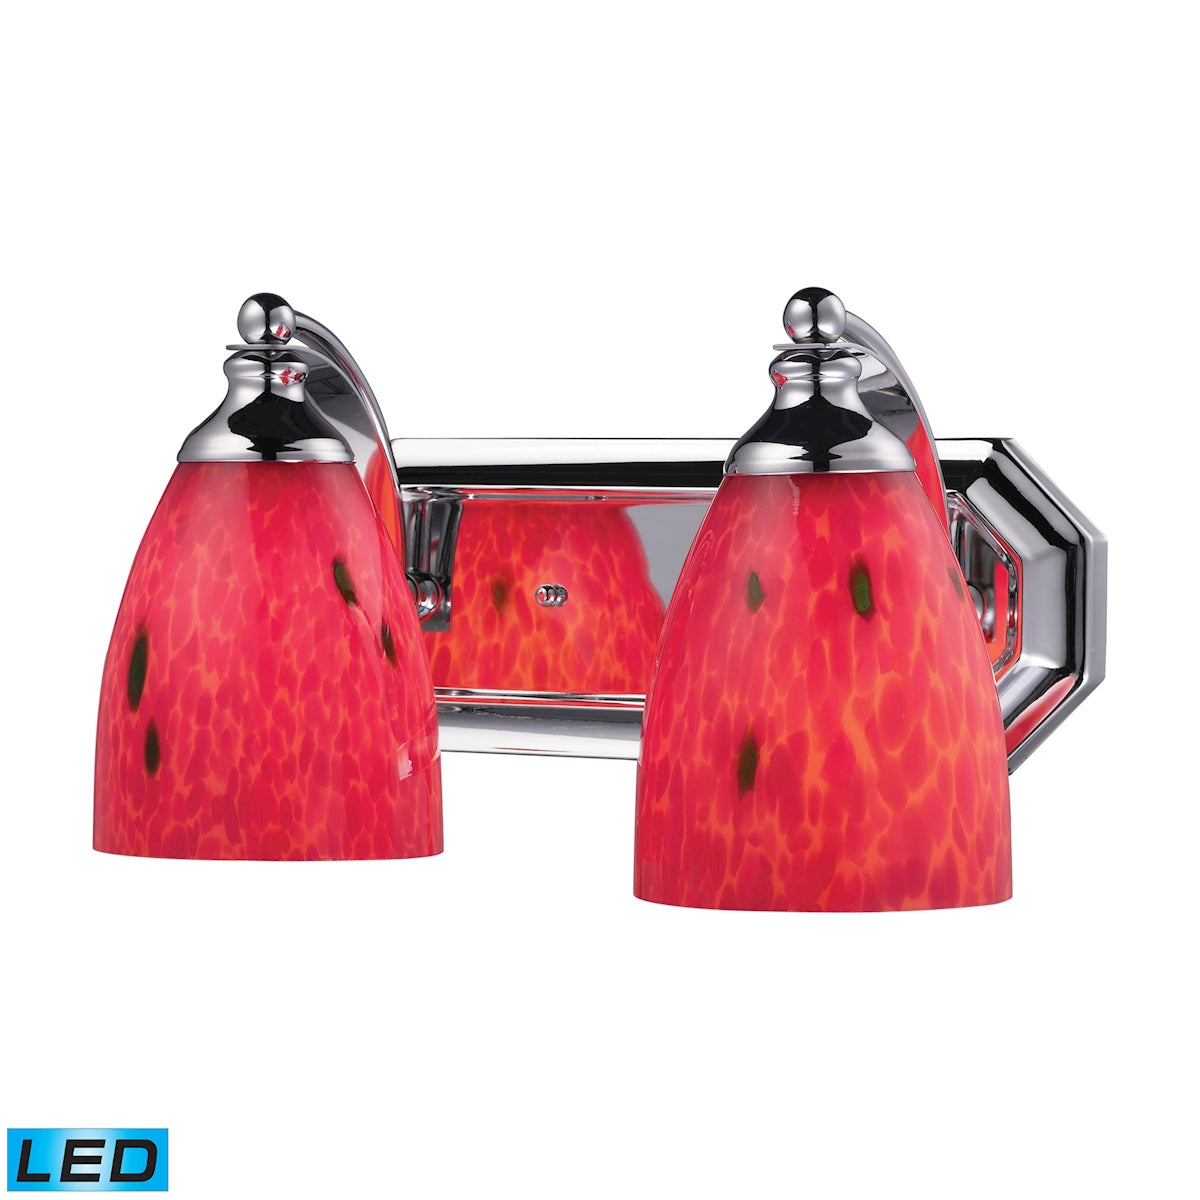 ELK Lighting 570-2C-FR-LED Mix and Match Vanity 2-Light Wall Lamp in Chrome with Fire Red Glass - Includes LED Bulbs